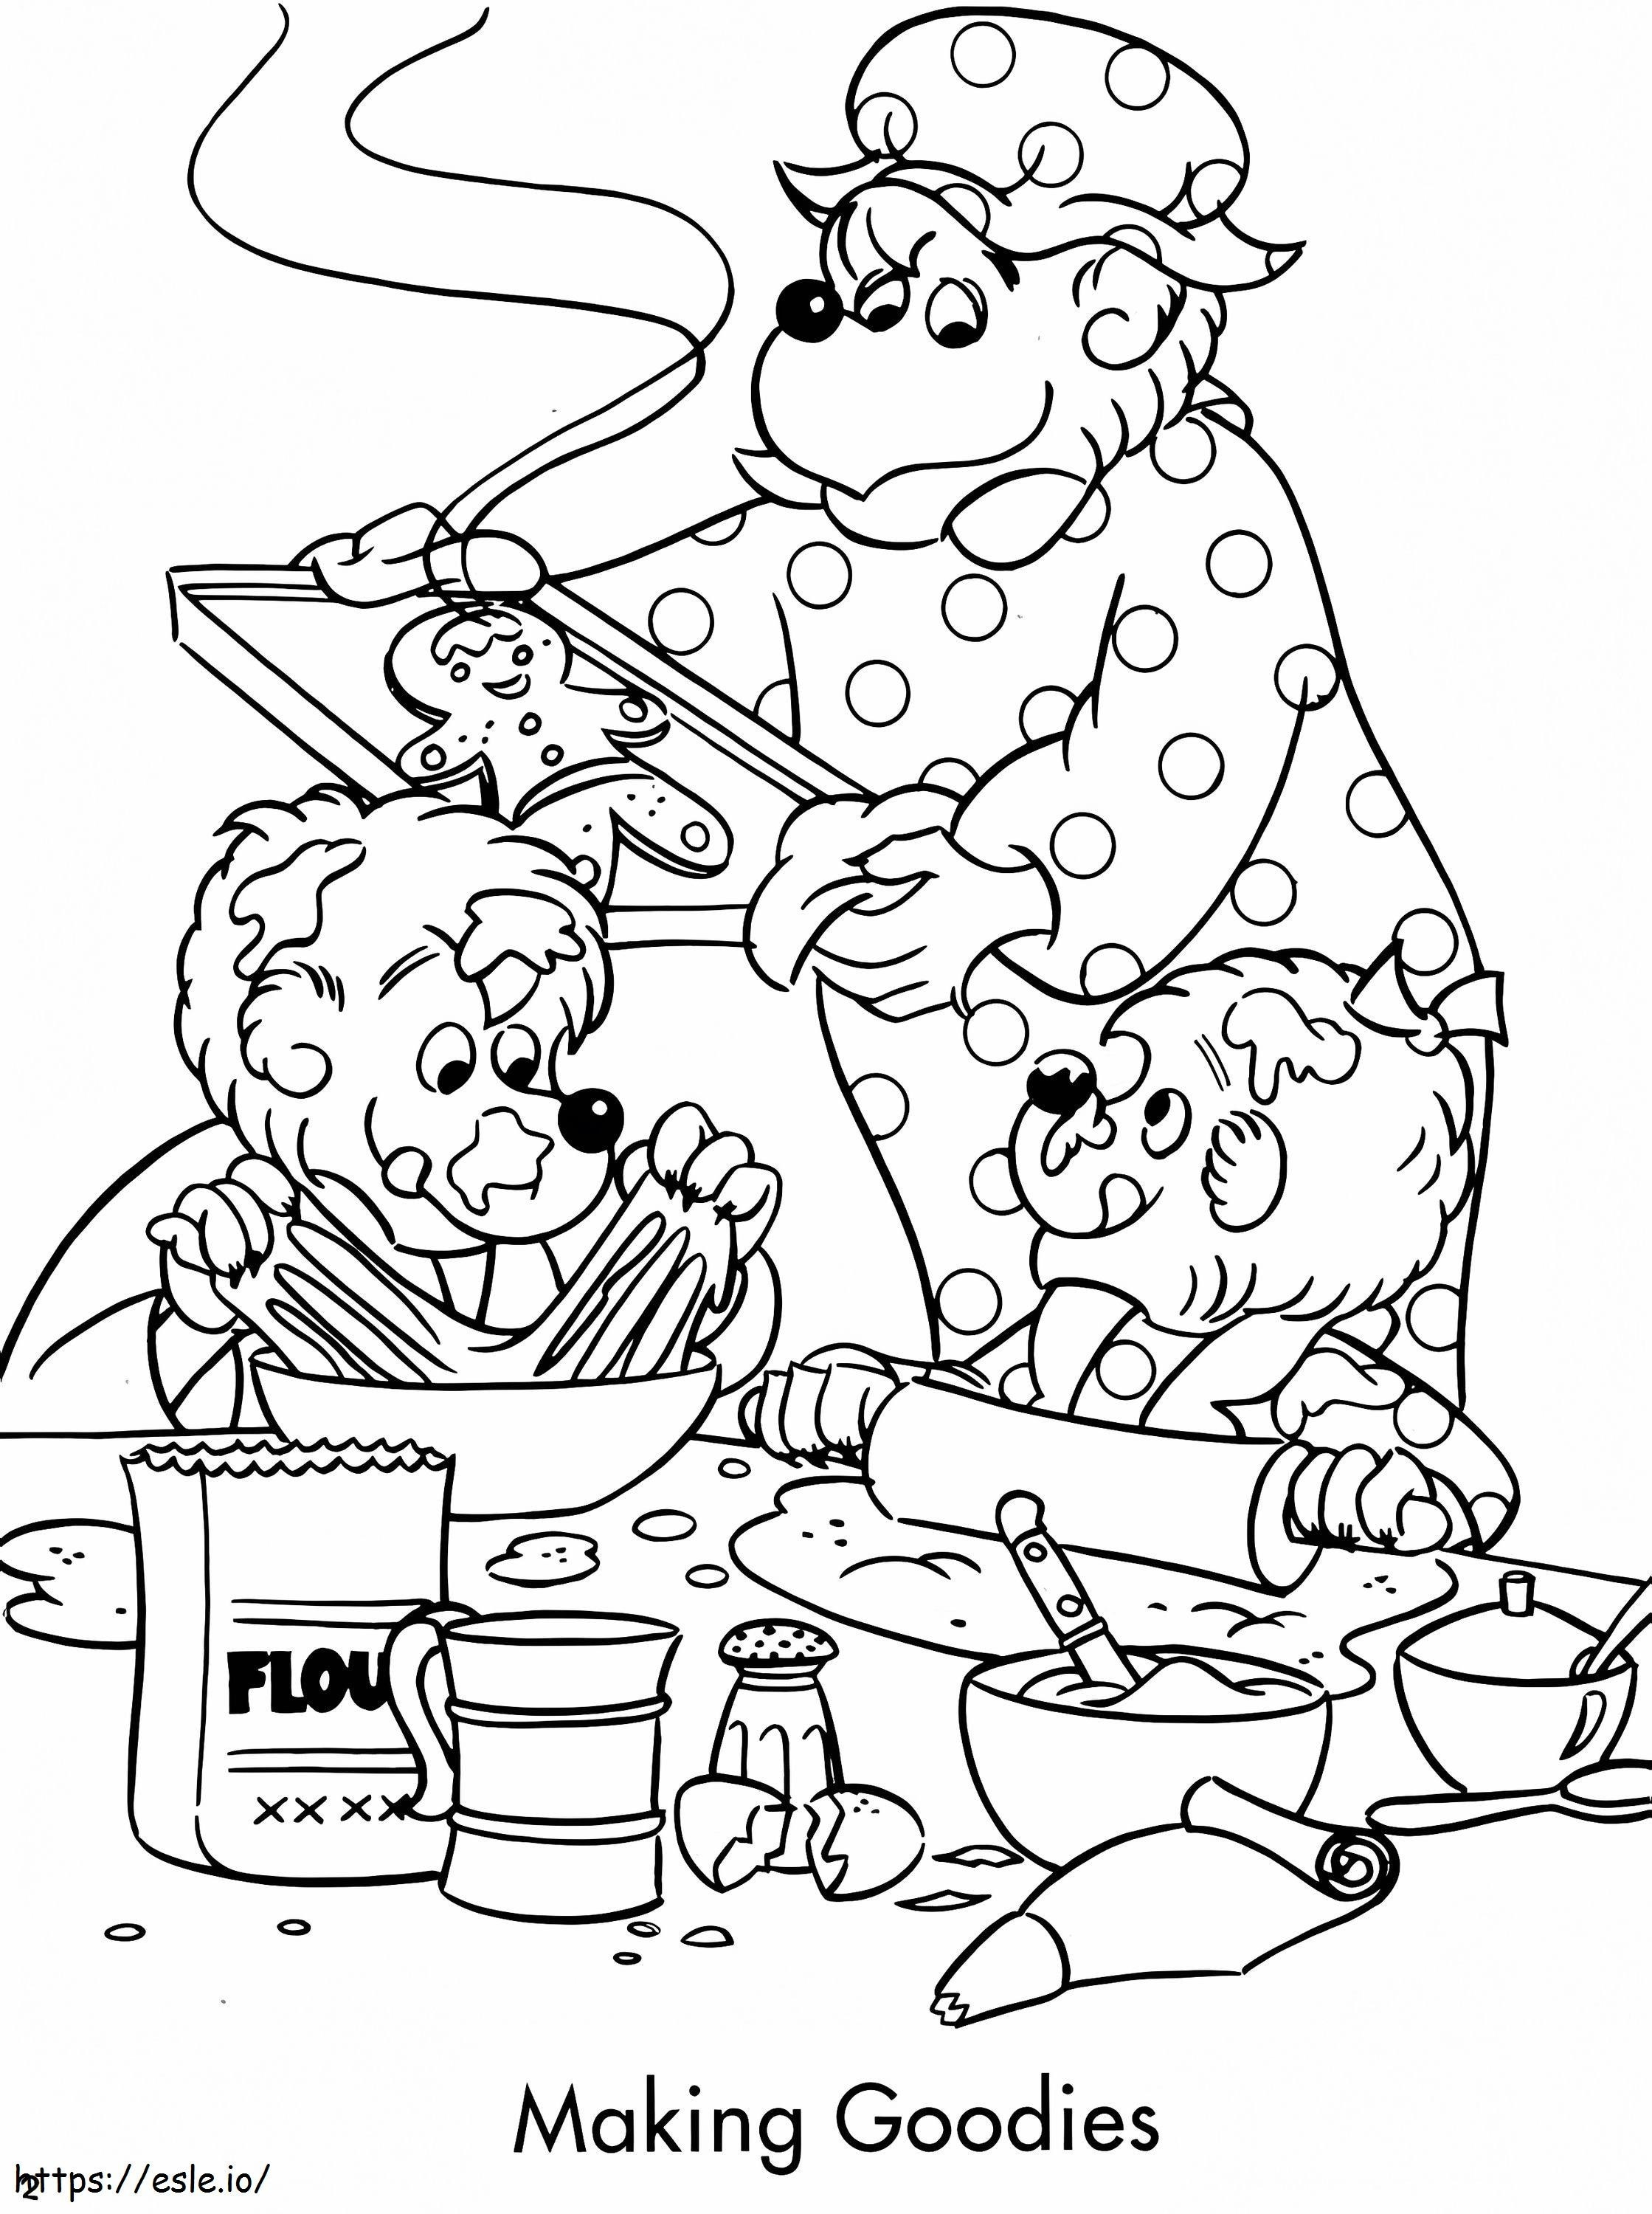 Berenstain Bears Making Goodies coloring page